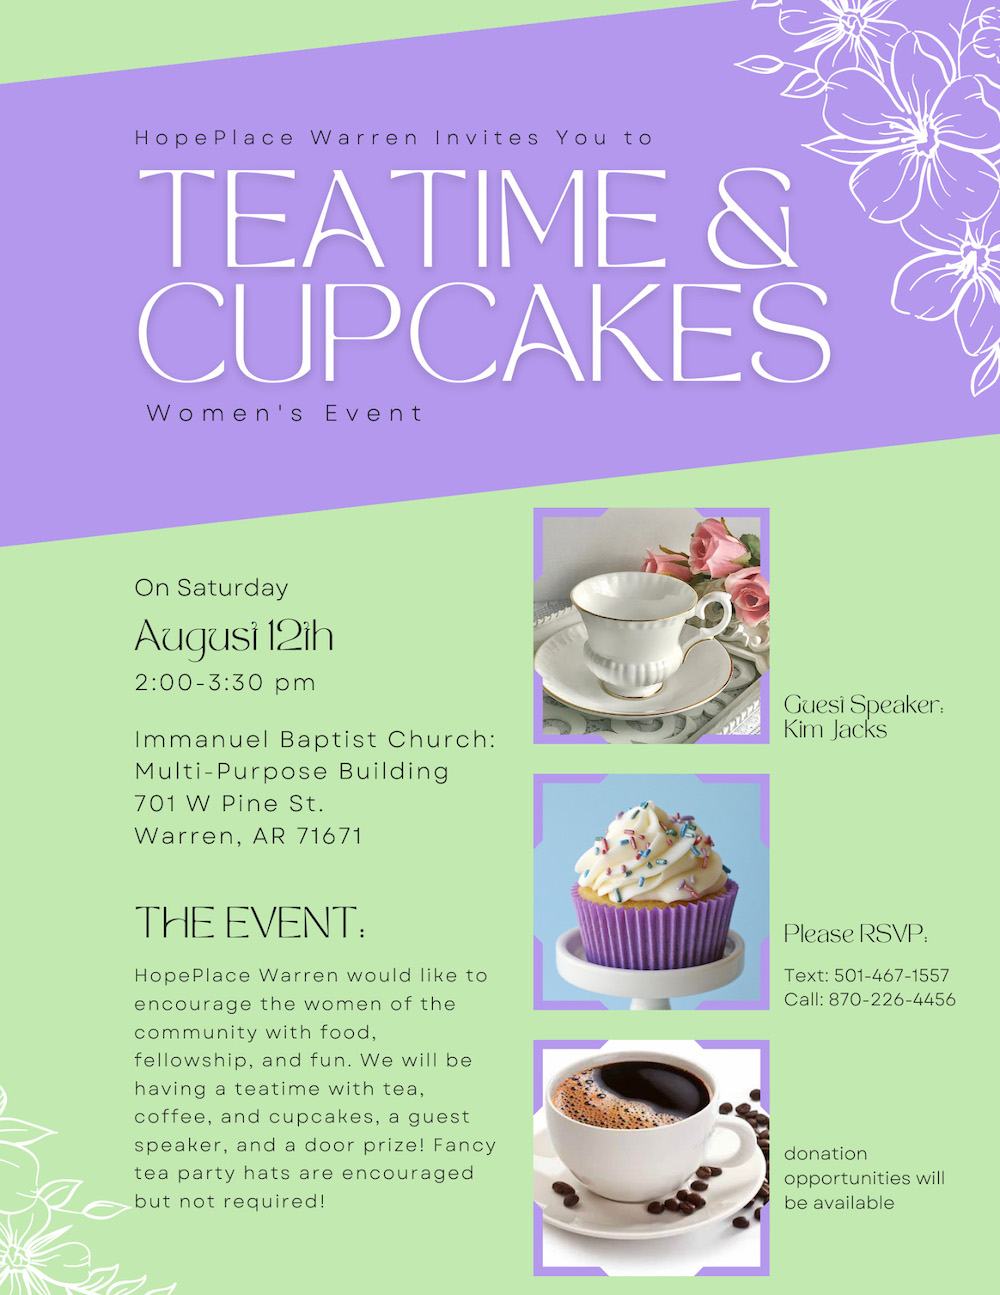 HopePlace Warren invites you to Tea Time and Cupcakes